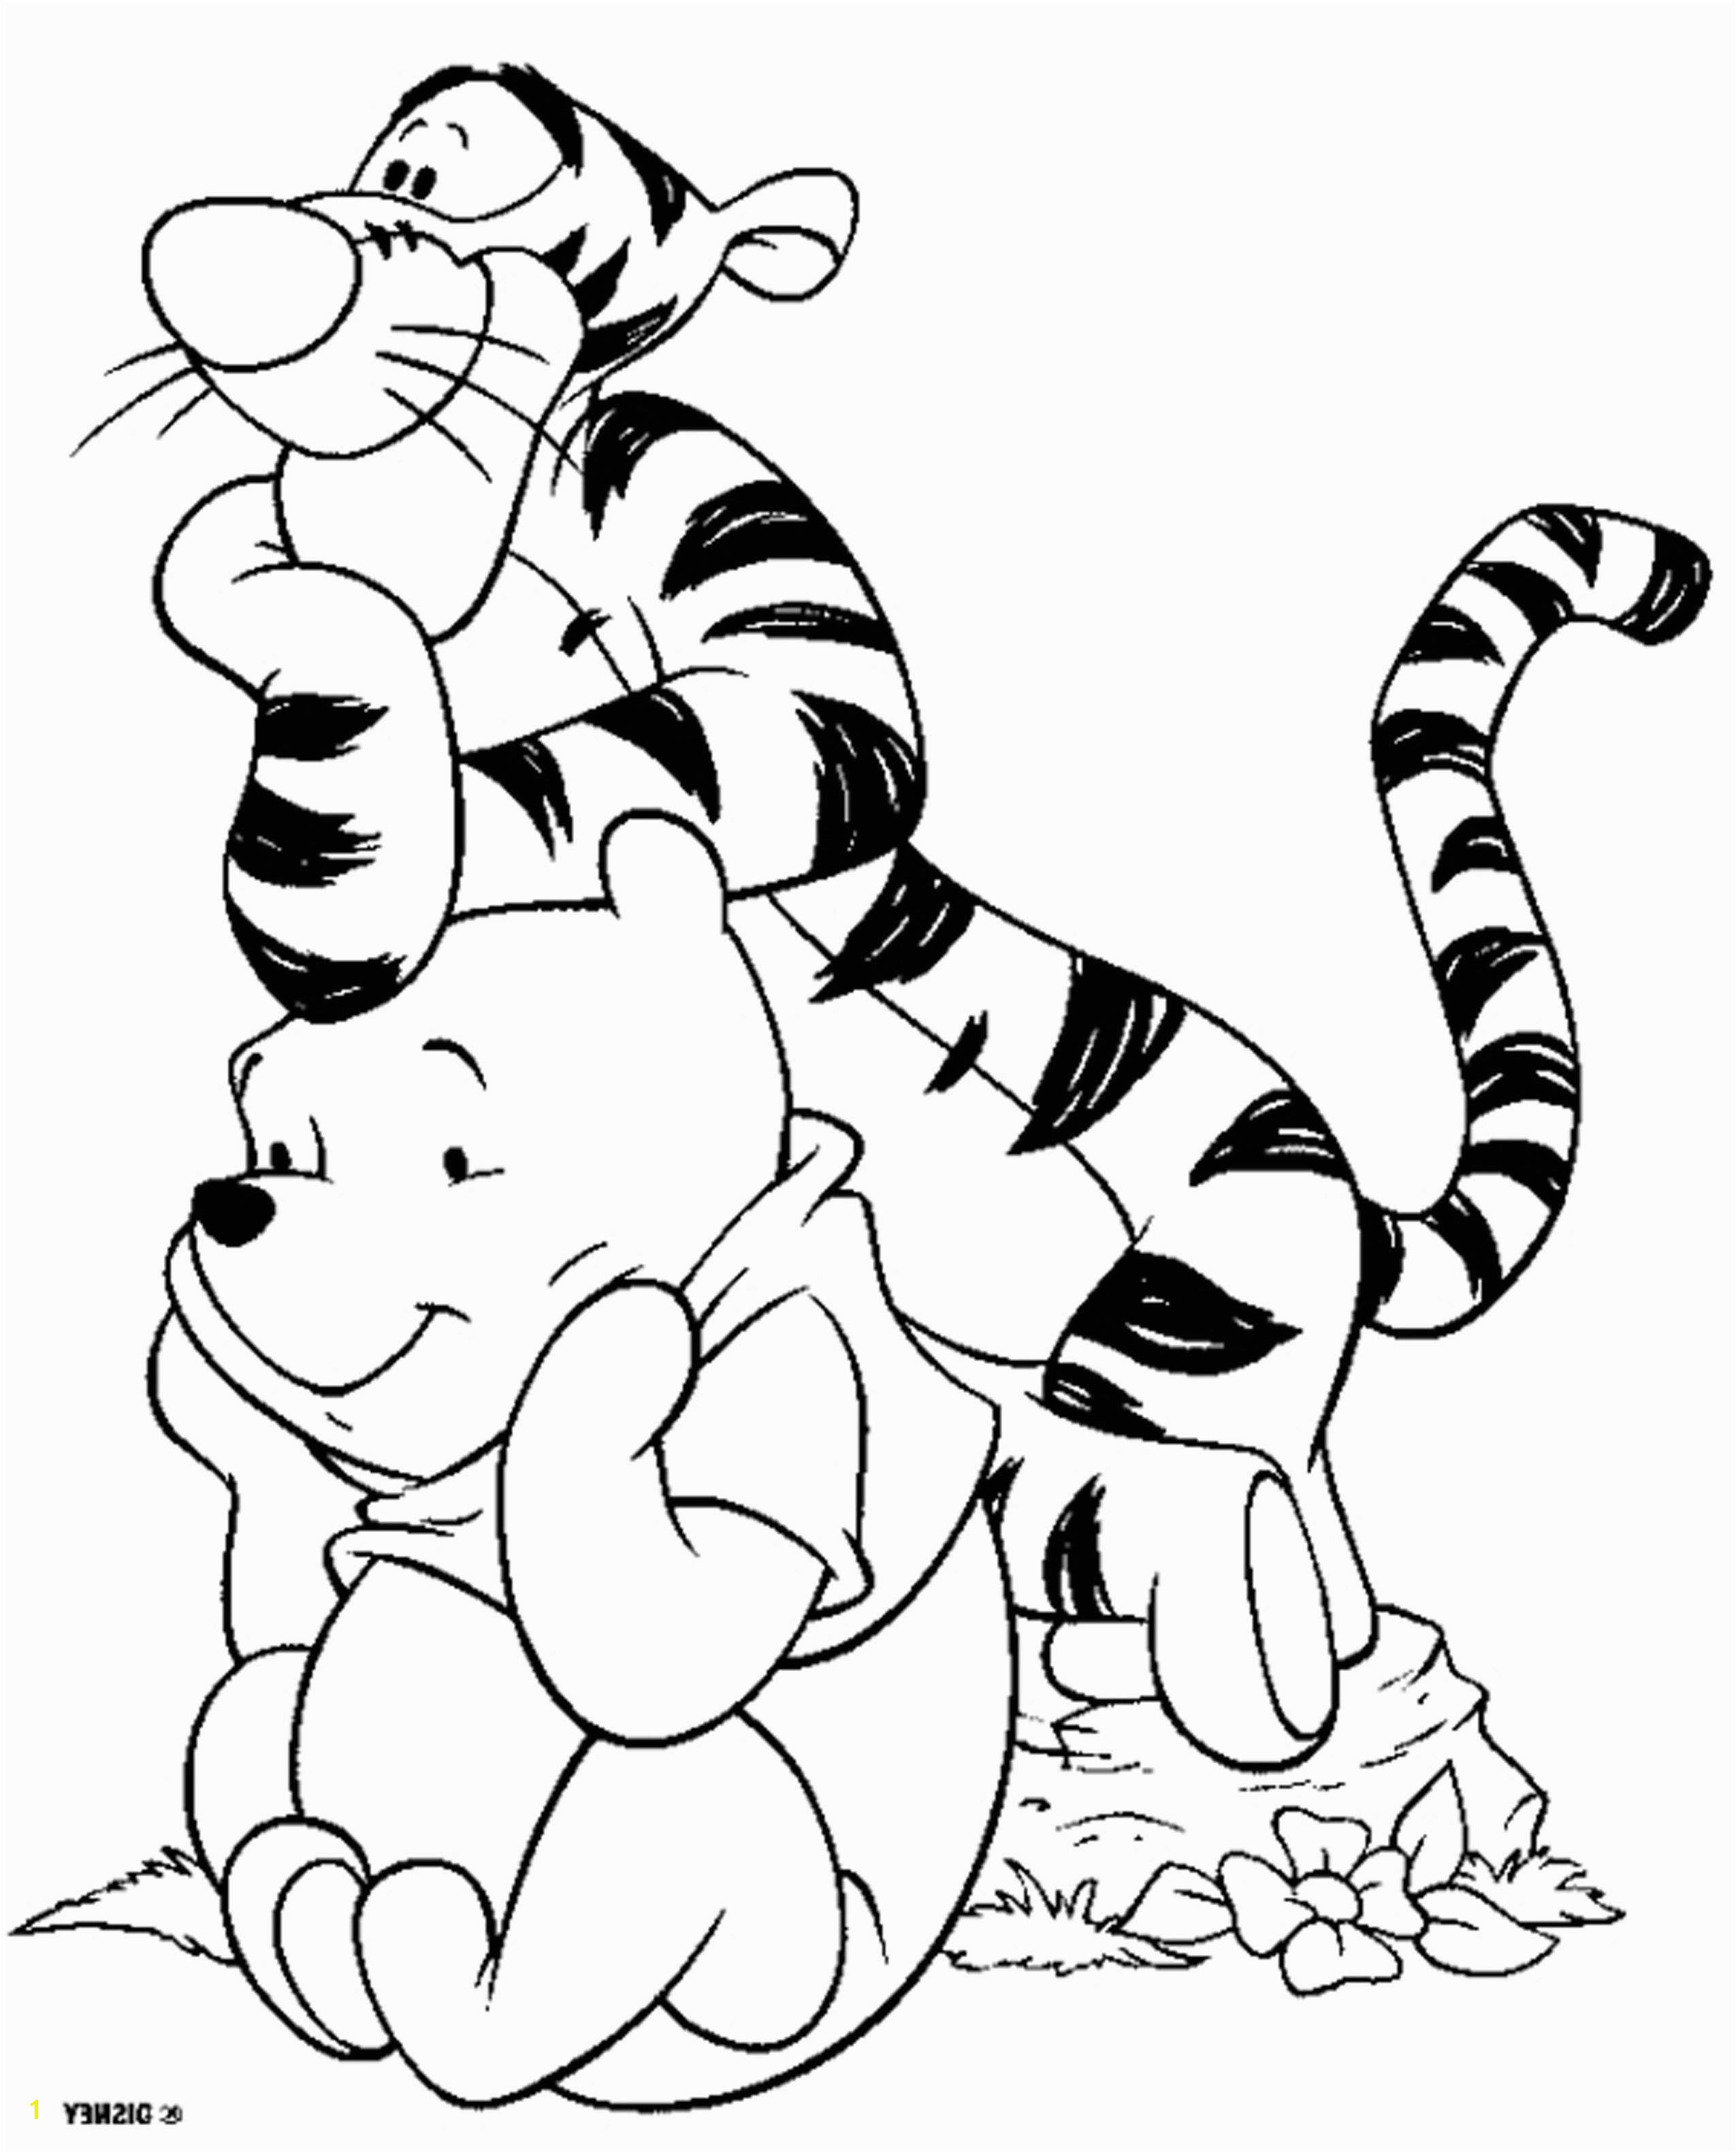 Free Printable Coloring Pages For Kids Disney Beautiful Coloring Pages Line New Line Coloring 0d Archives Con Scio Fun Time Free Printable Coloring Pages